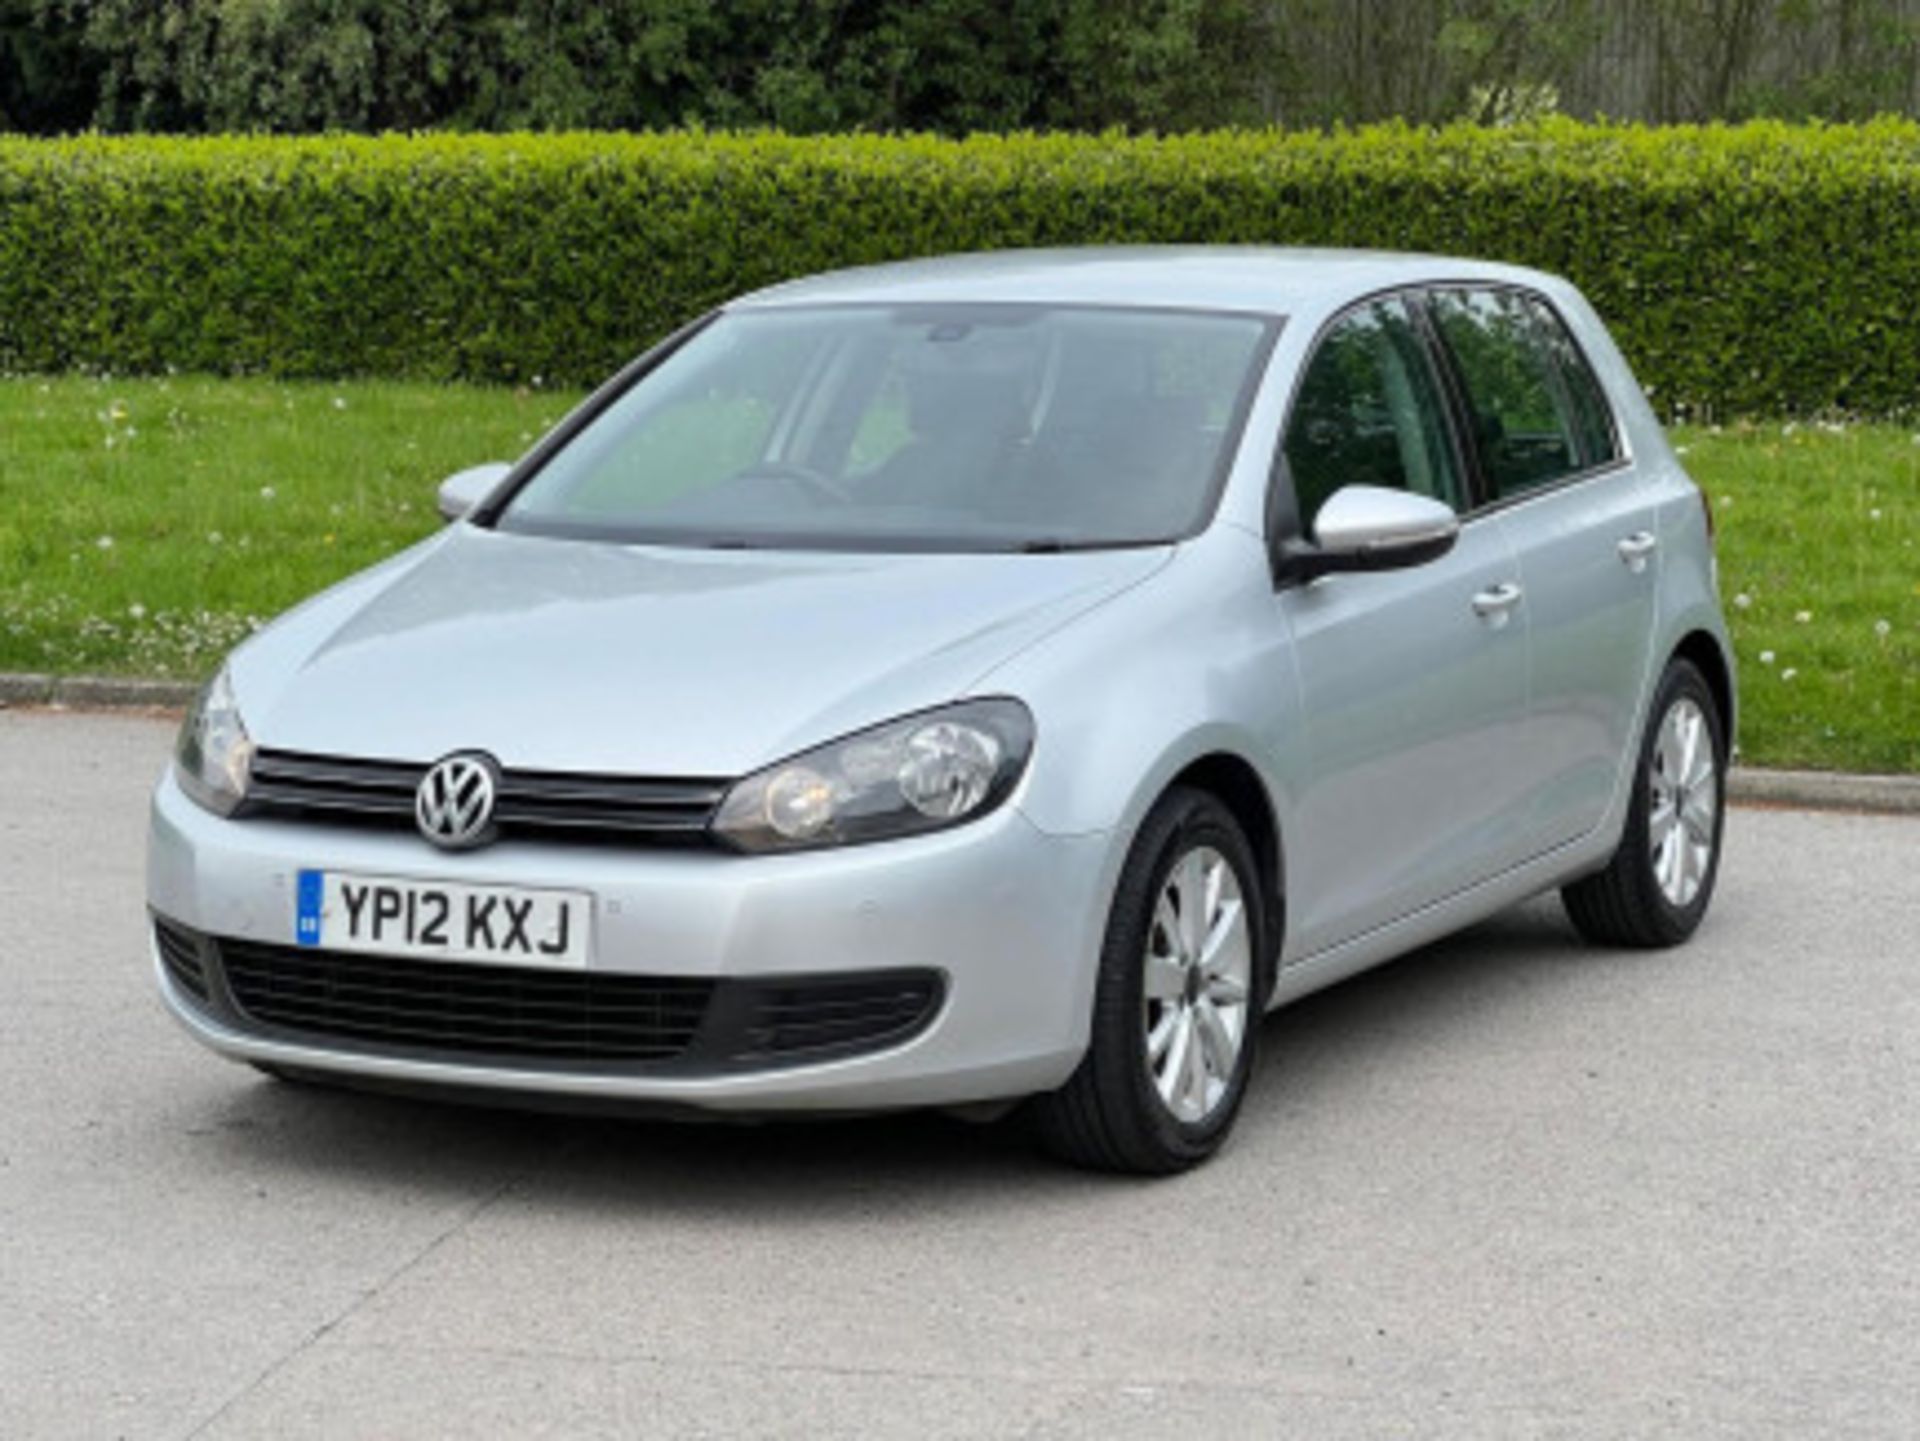 IMPECCABLE 2012 VOLKSWAGEN GOLF 1.6 TDI MATCH >>--NO VAT ON HAMMER--<< - Image 57 of 116